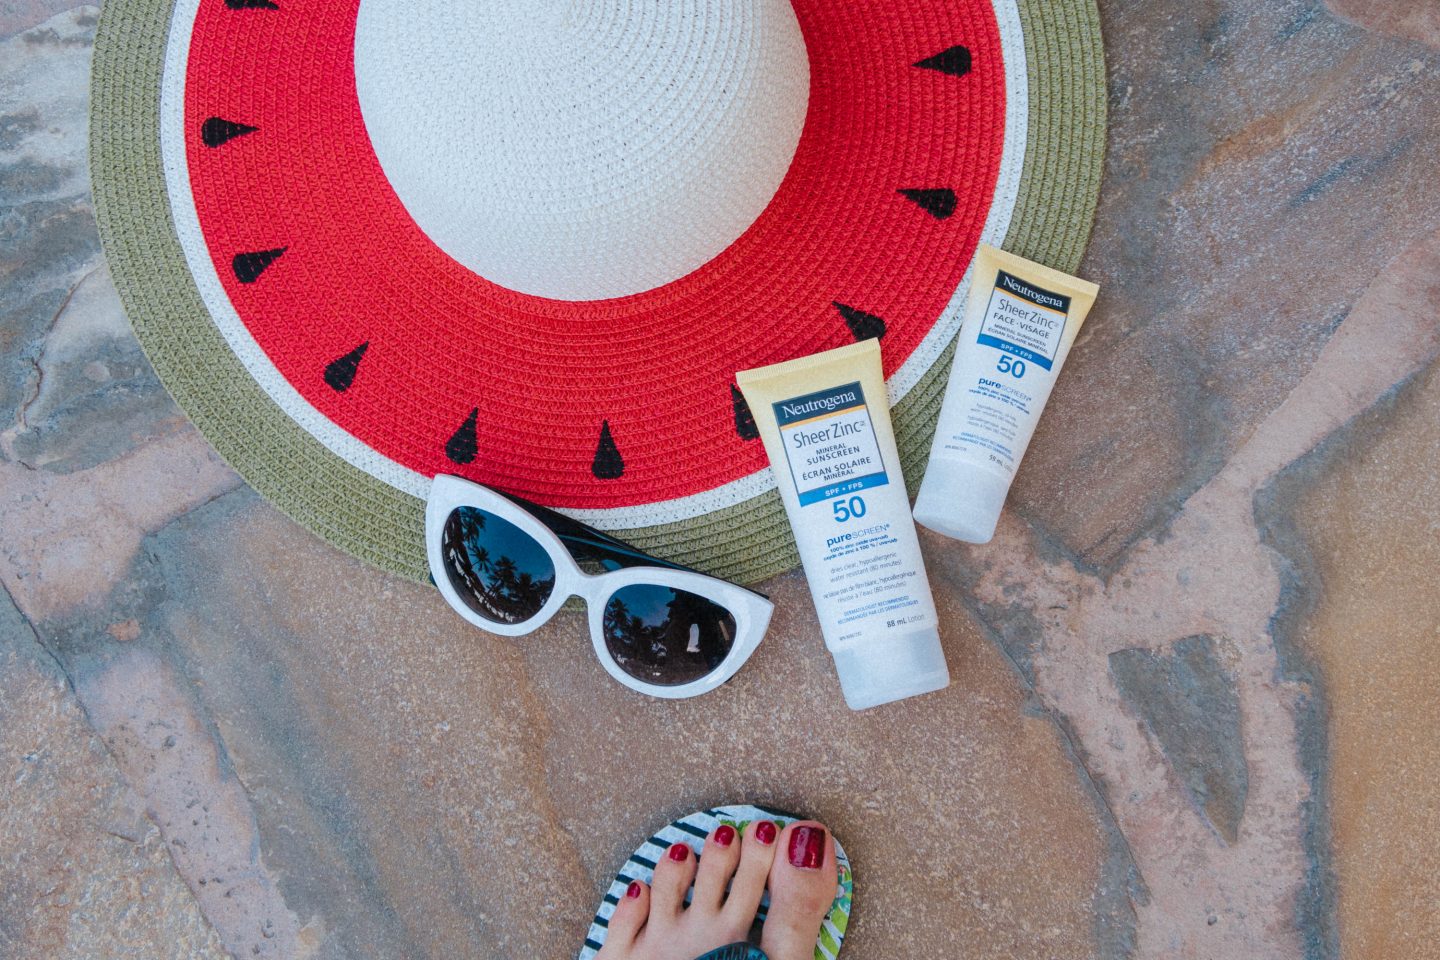 Using Neutrogena's Sheer Zinc Mineral Sunscreen to protect my skin against the summer rays